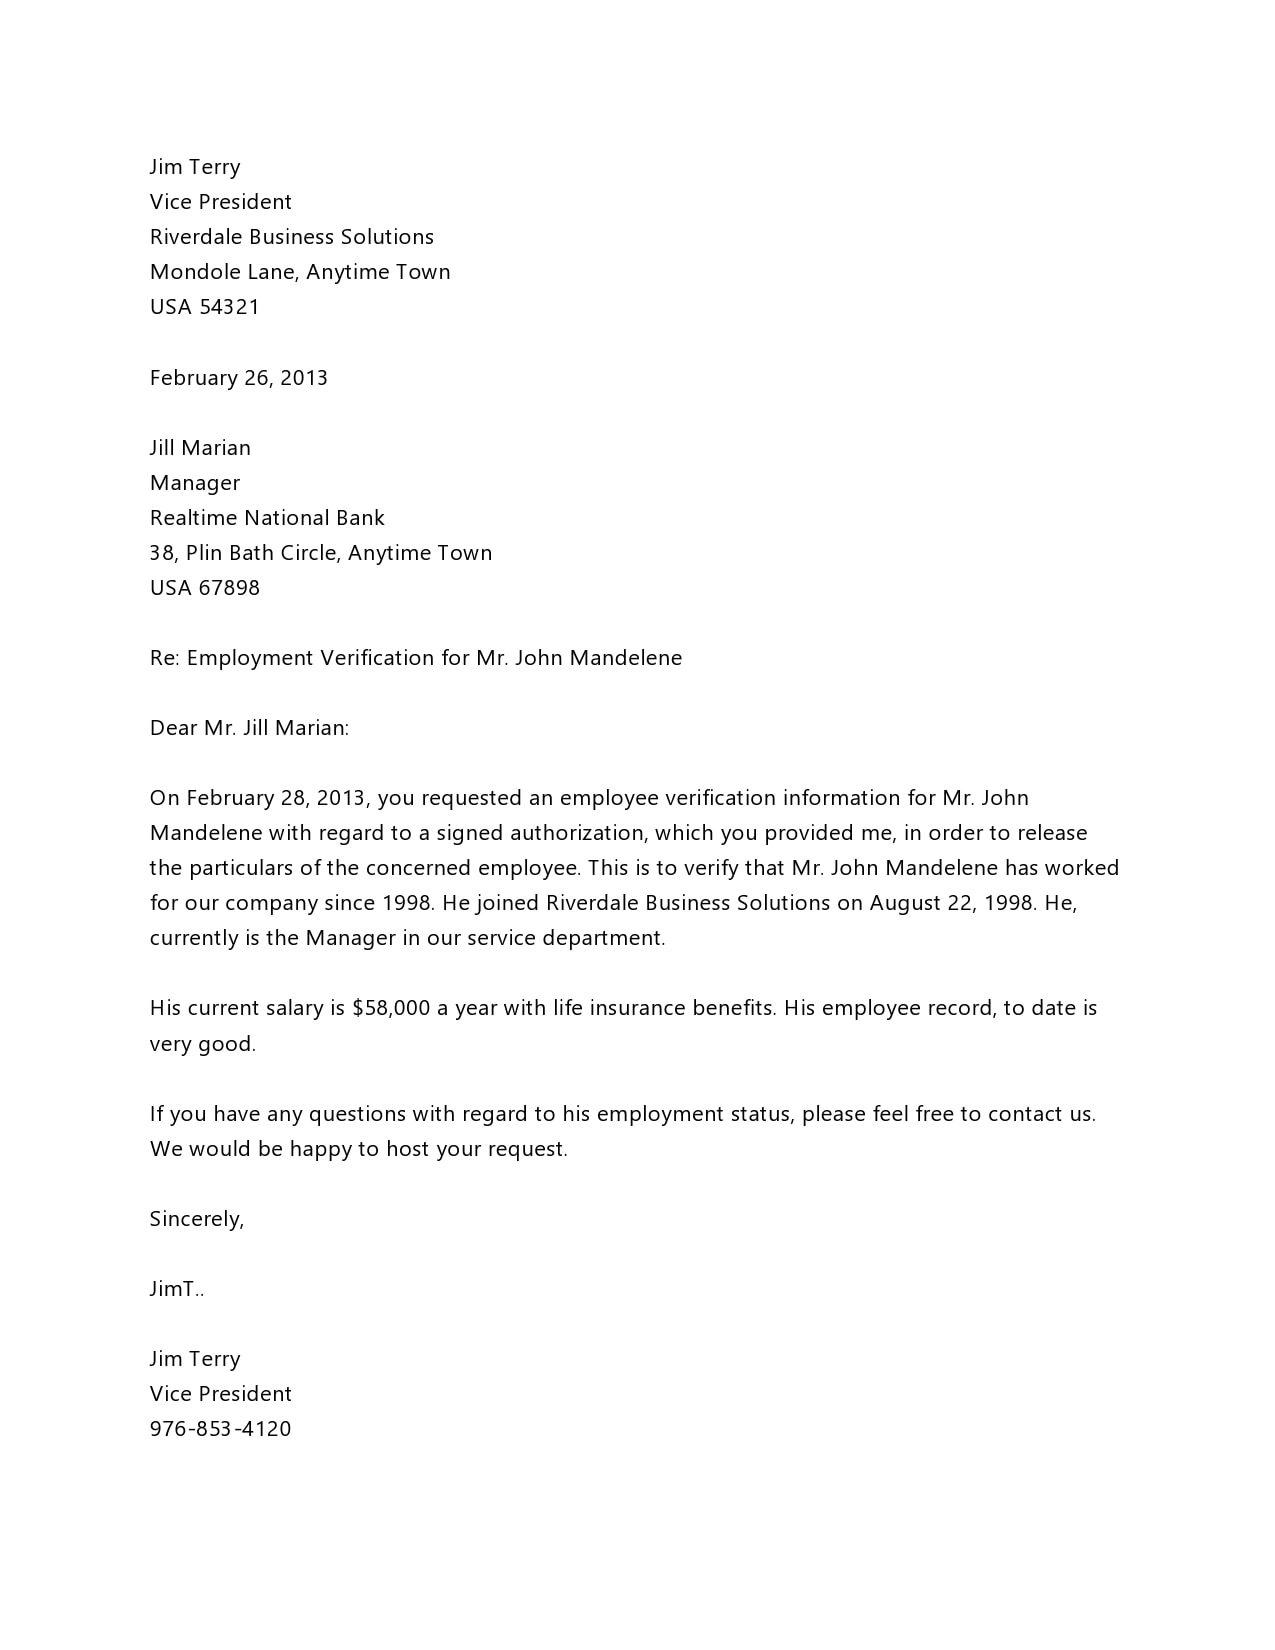 Employee Release Letter Sample From A Company from templatearchive.com